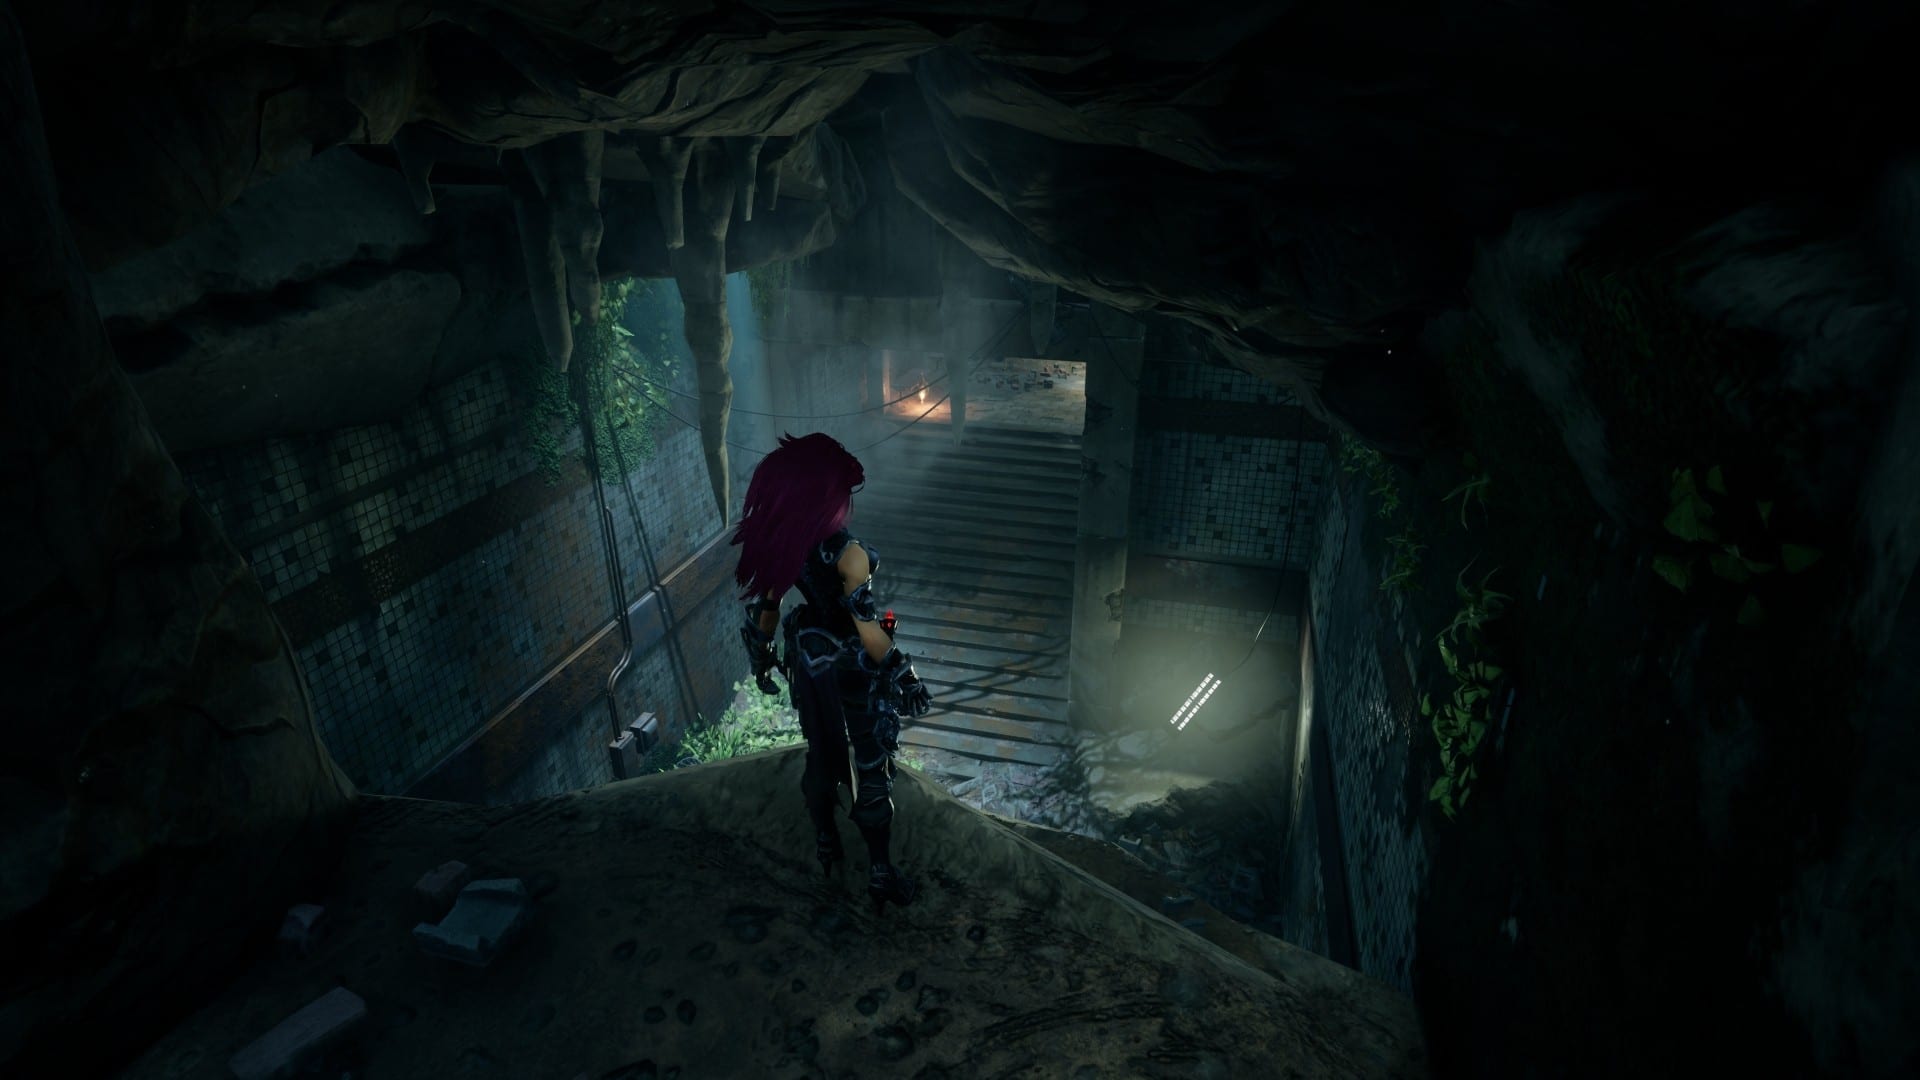 Leaflet sudden Staircase Darksiders 3: Bridge Puzzle Guide